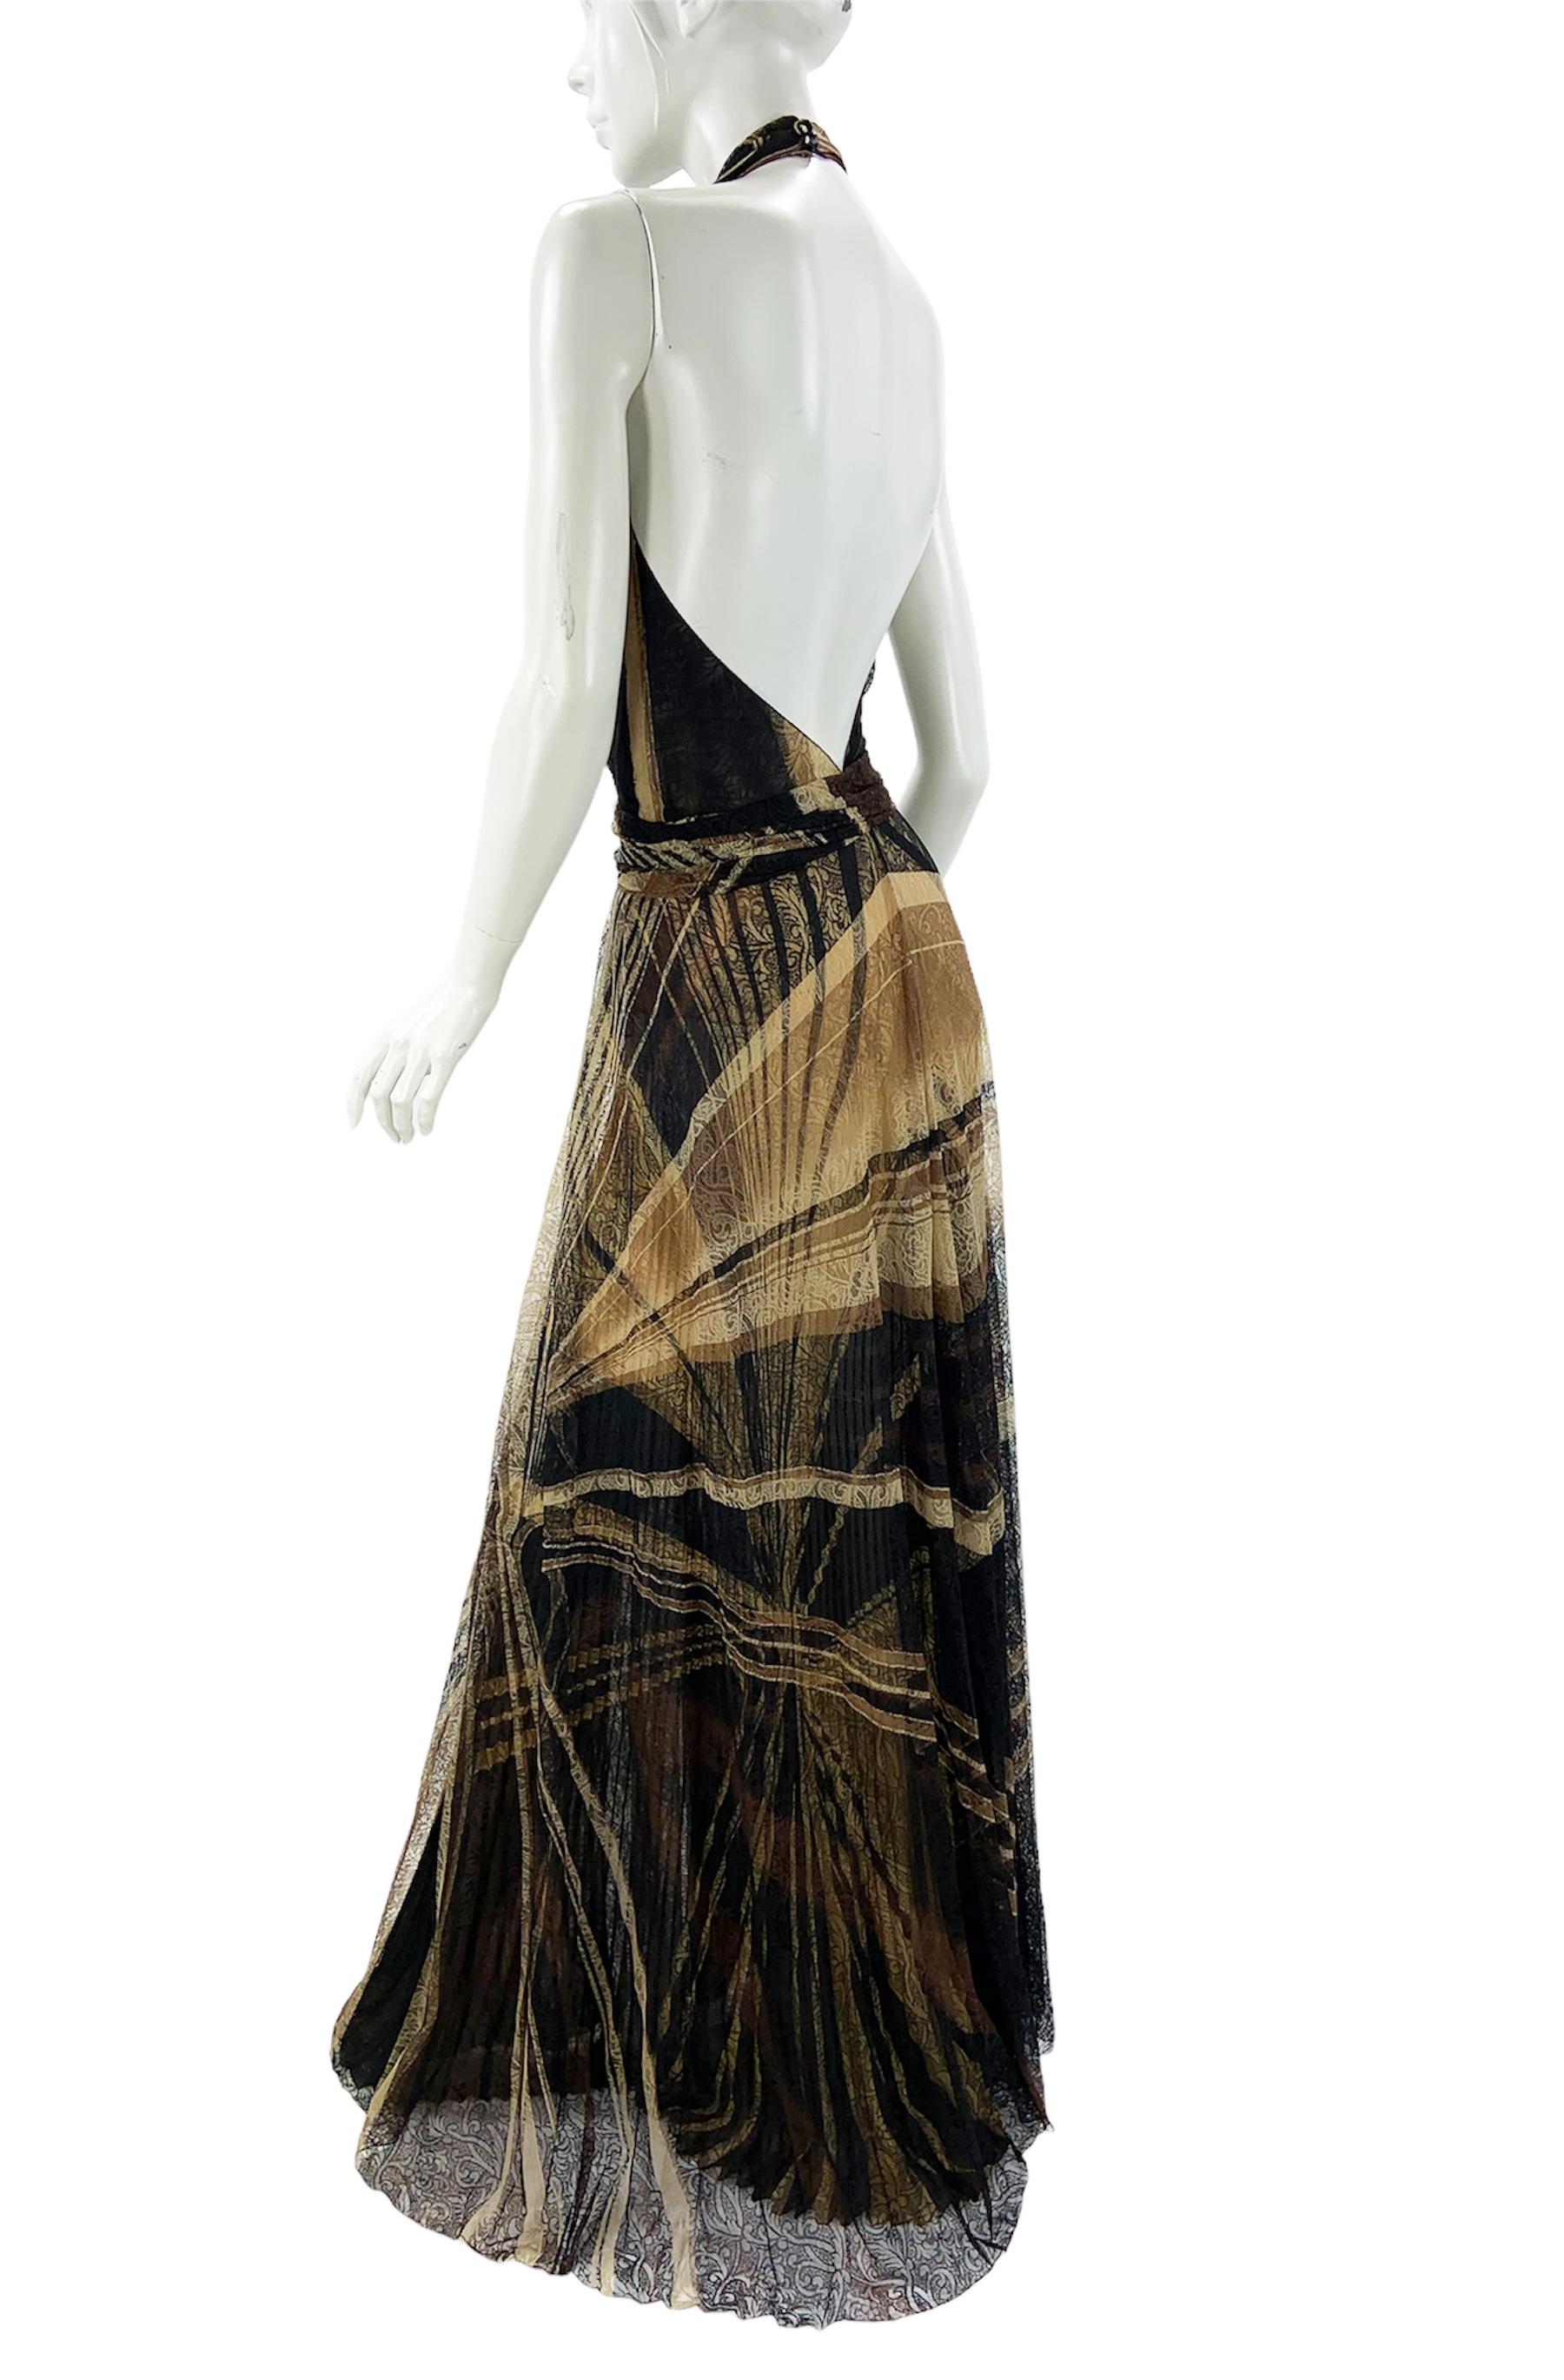 Vintage Gianni Versace Couture FW 2000 AD Campaign Lace Plunging Dress Gown 40 For Sale 4